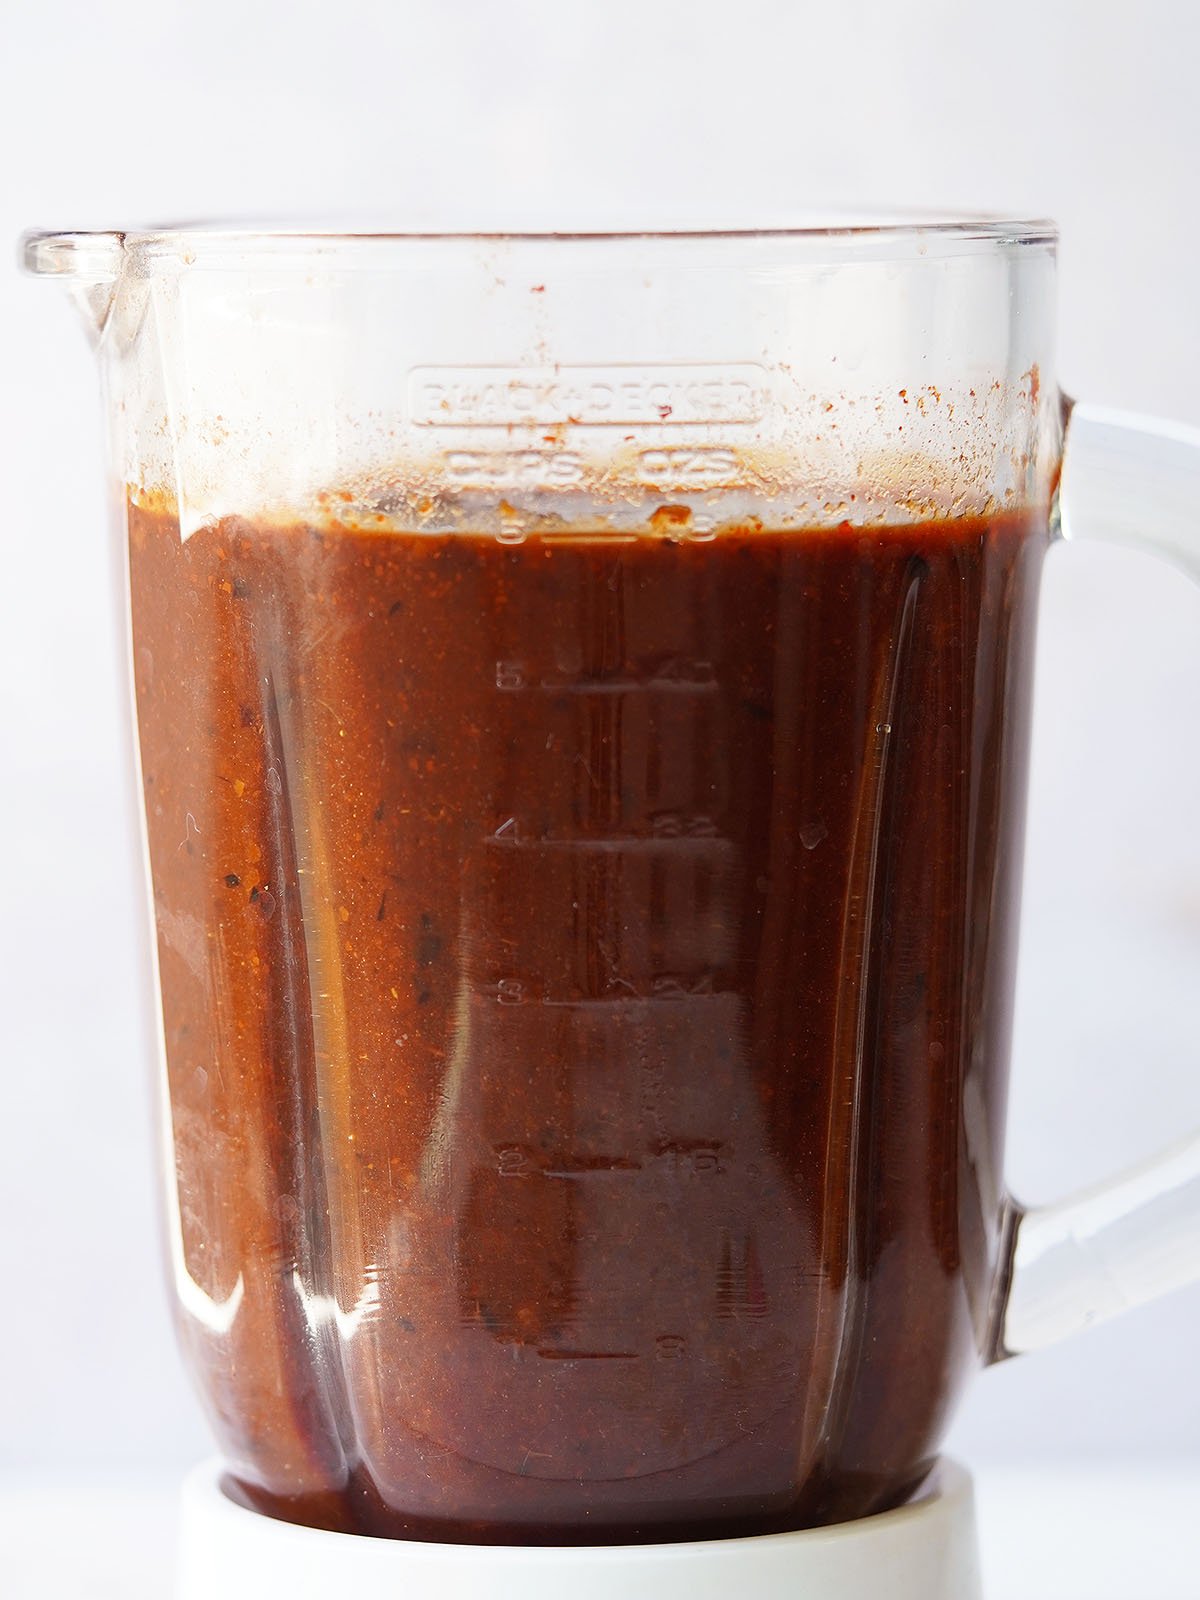 Mixing chamoy in a blender.